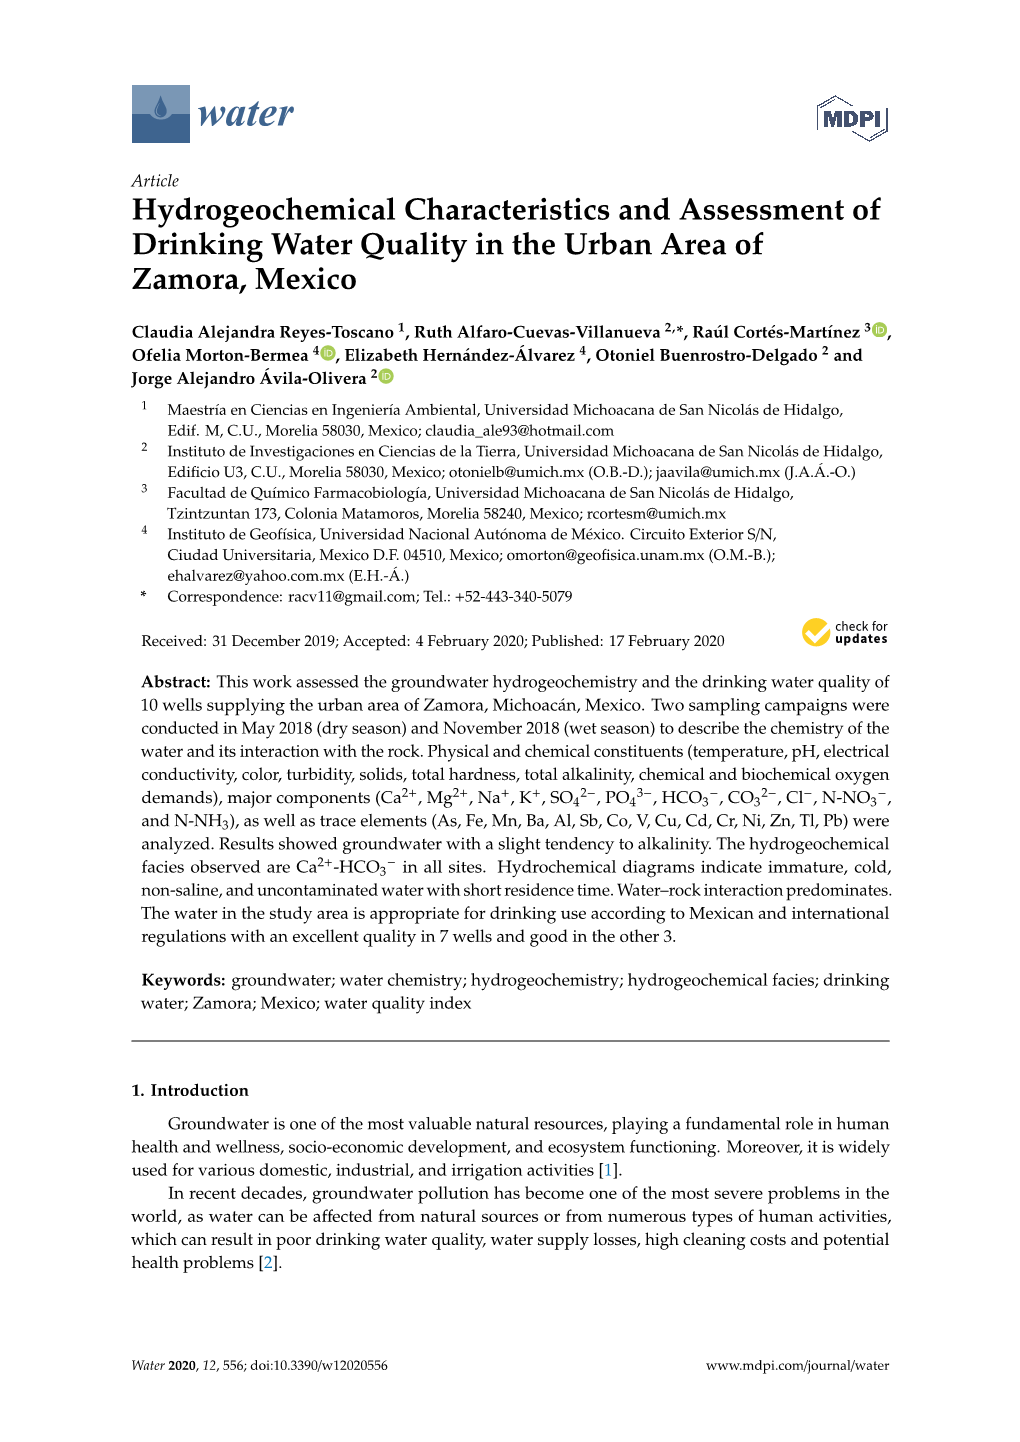 Hydrogeochemical Characteristics and Assessment of Drinking Water Quality in the Urban Area of Zamora, Mexico